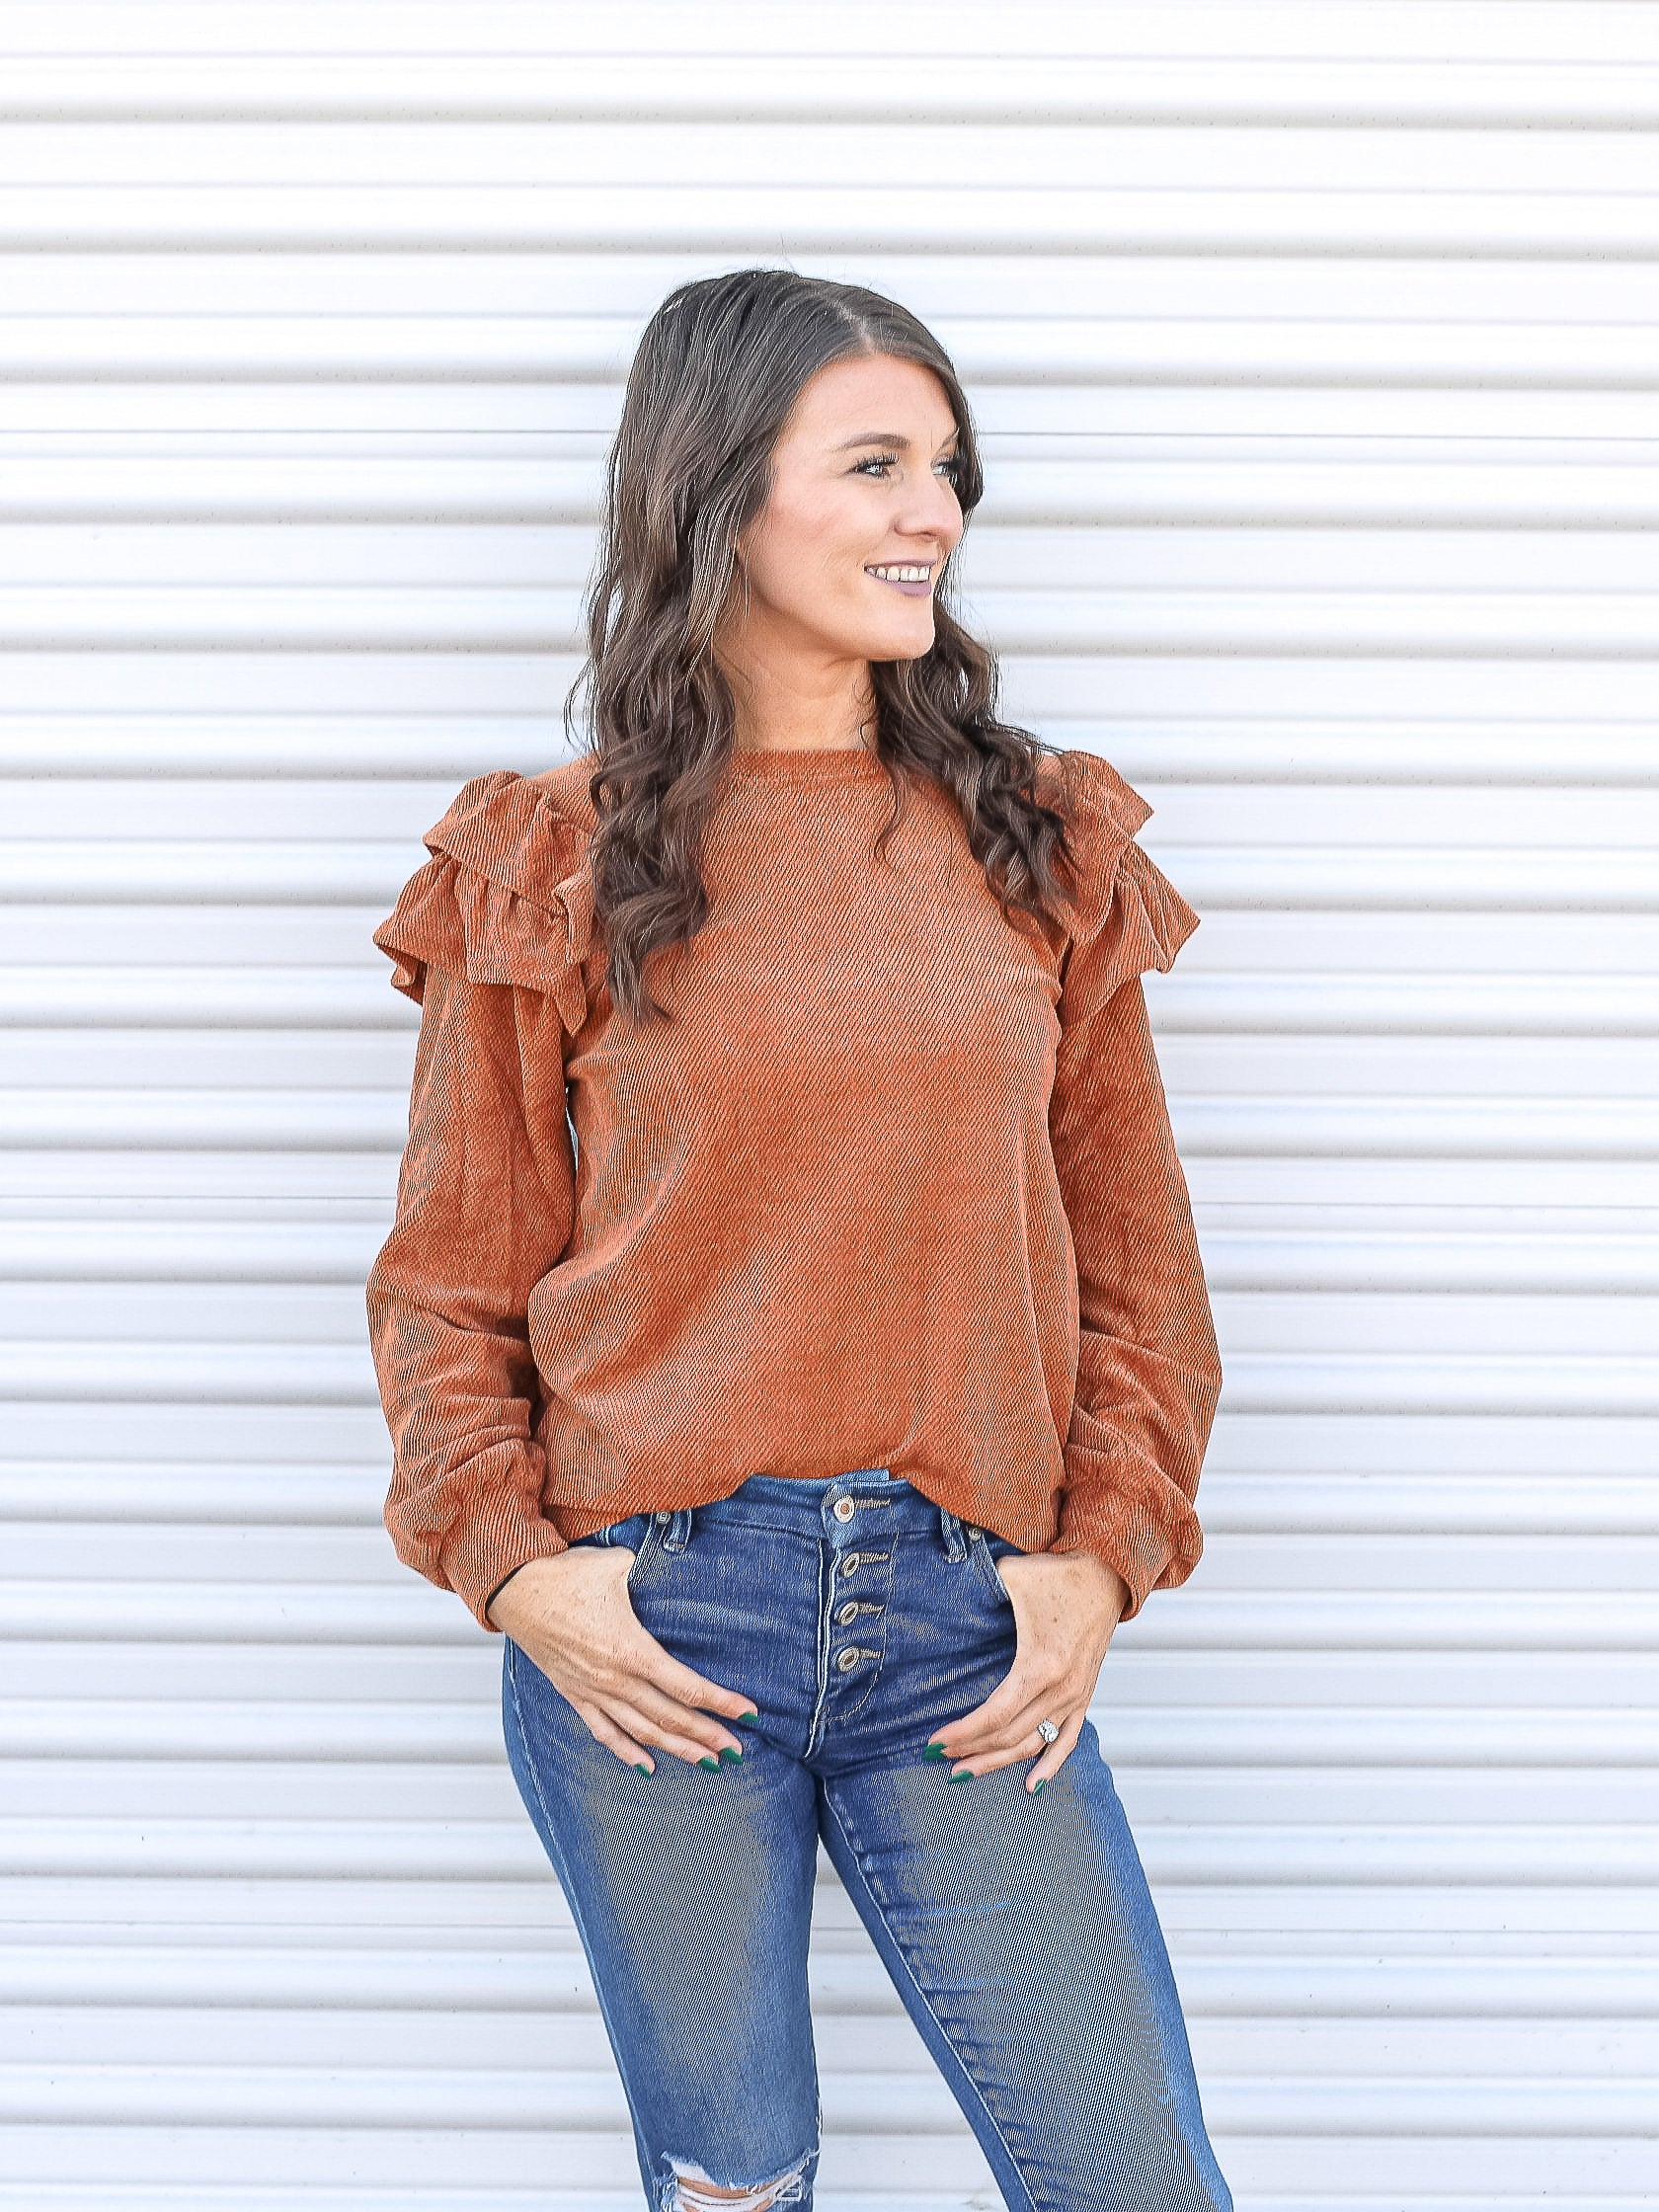 Rust colored ruffled shoulder sweater tucked into jeans